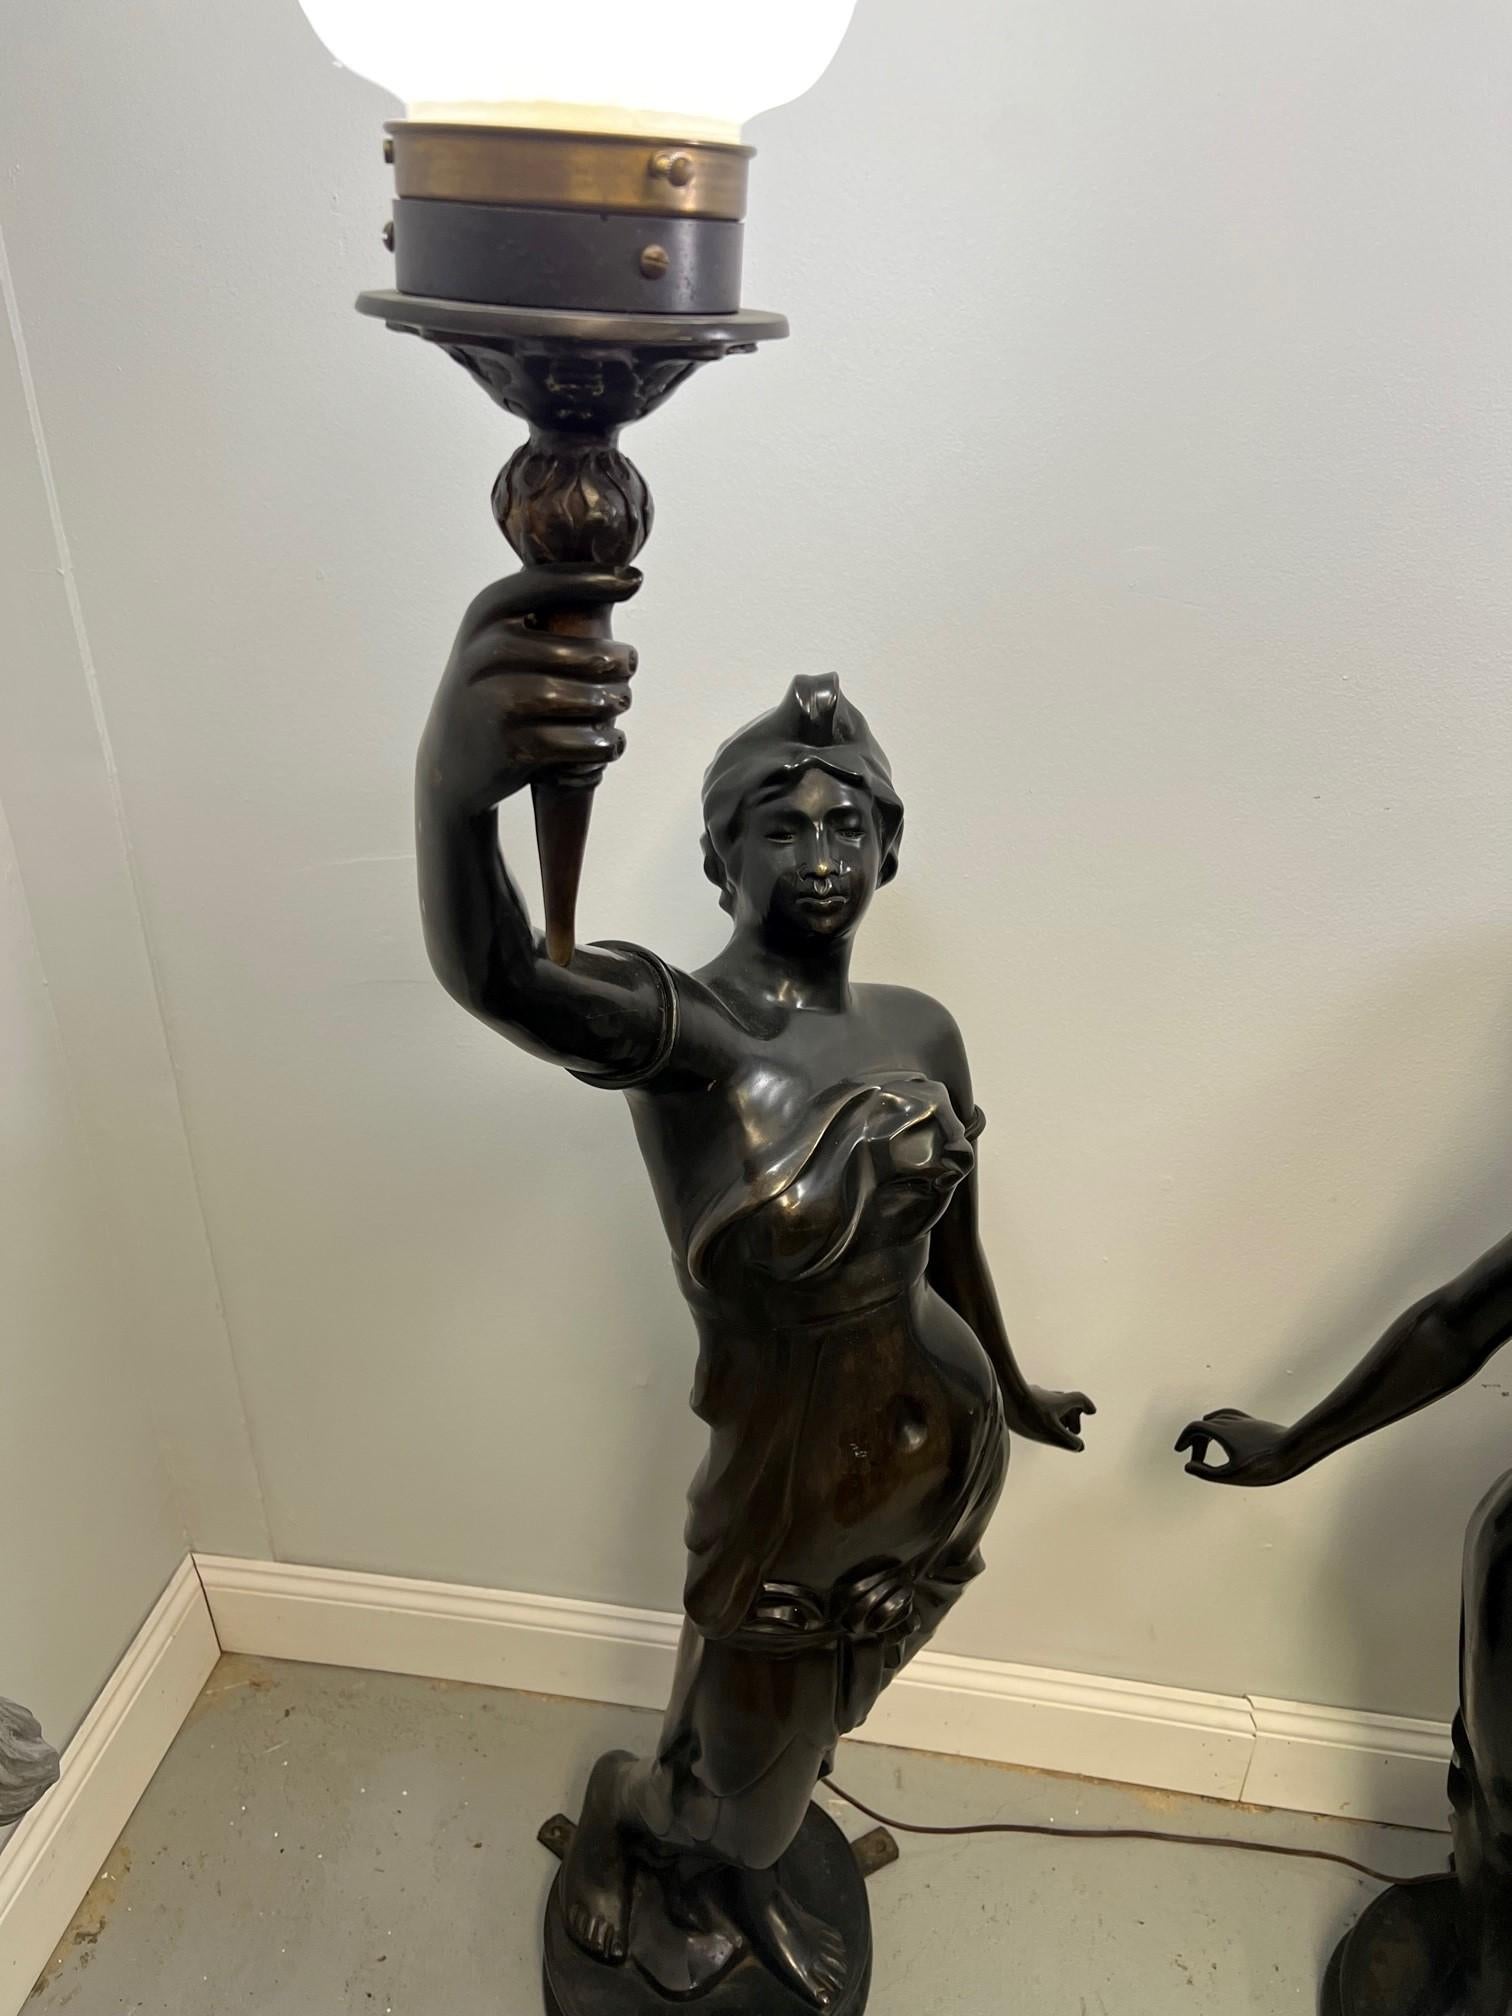 Beautiful pair of bronze figural torchieres of two women holding torches which are electrified. This is a classic pair of draped bronze women holding aloft a flamed torch. The pair was imported to the United States from Thailand known for quality